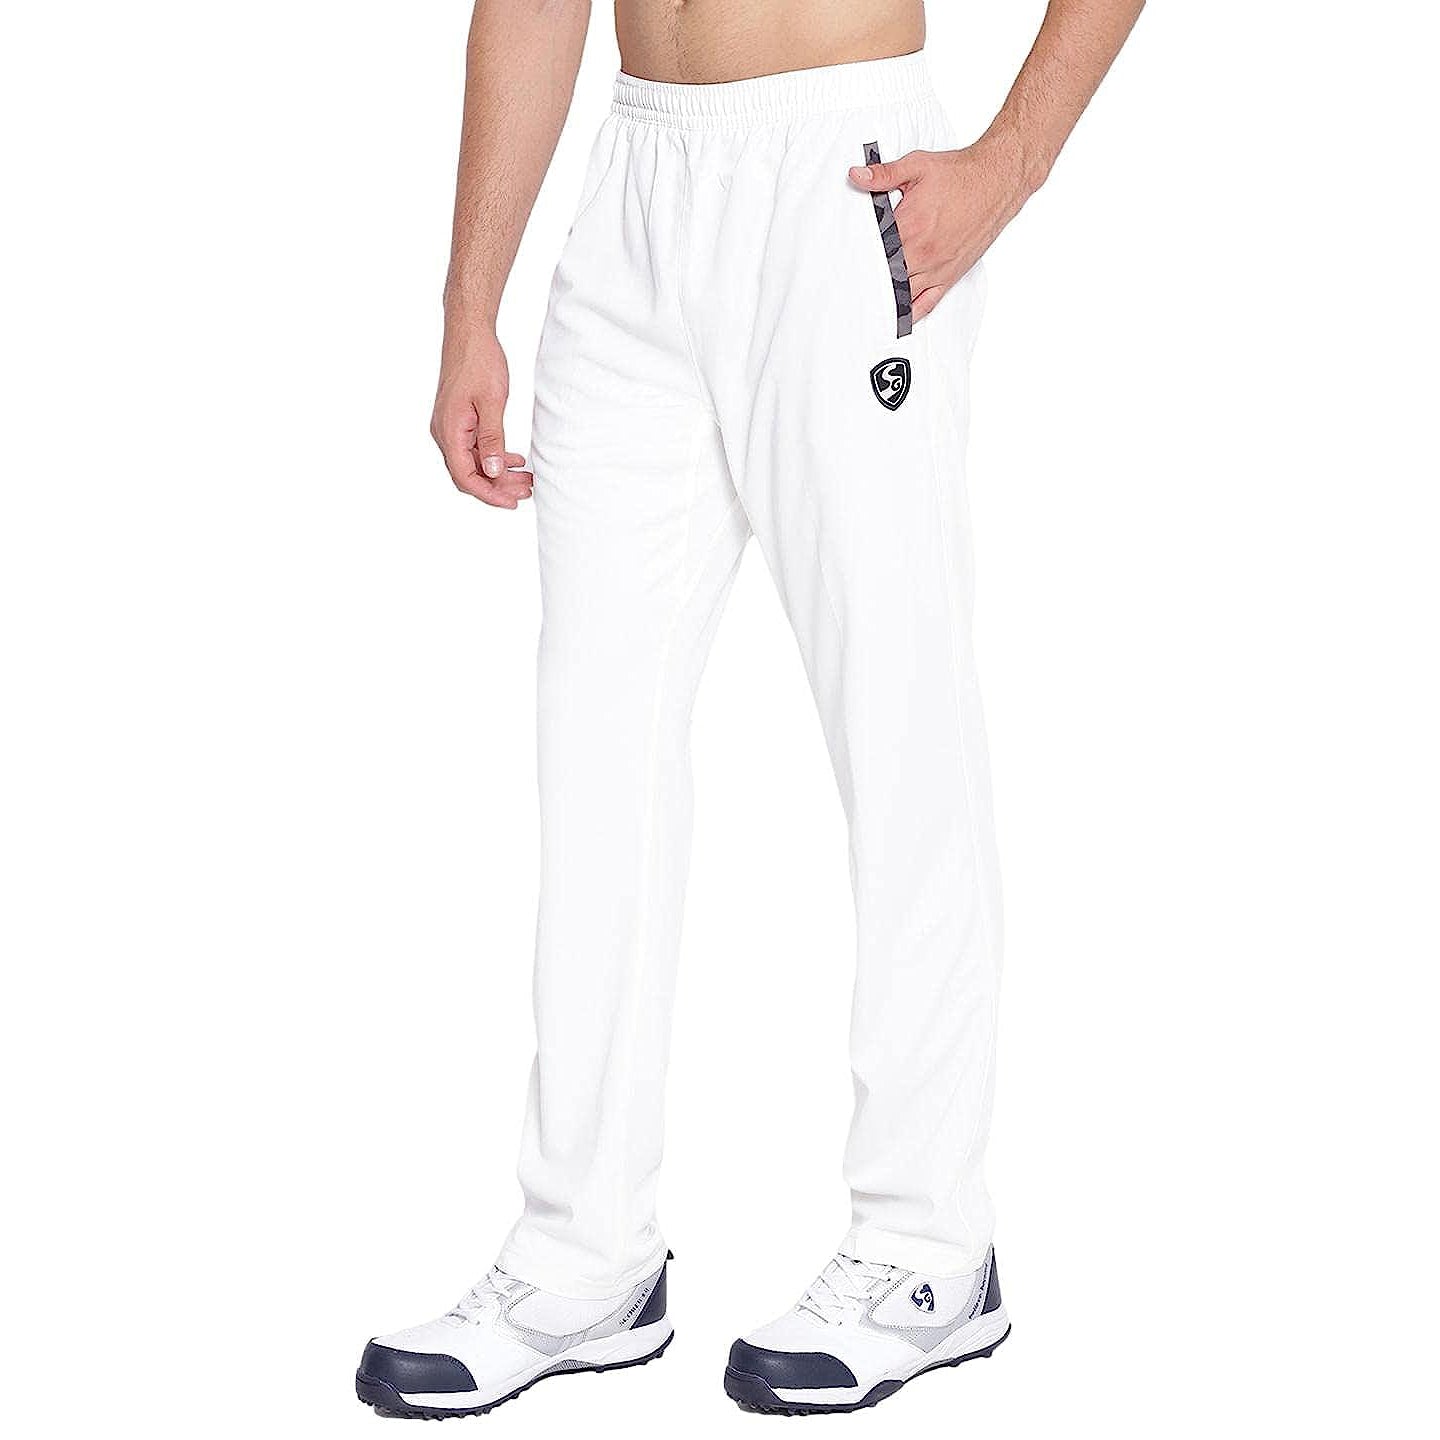 SS Professional Cricket Pant Buy Online India  Cricket Clothing Kit   Whites  See Price Photos  Features  Specialist Cricket Shop India